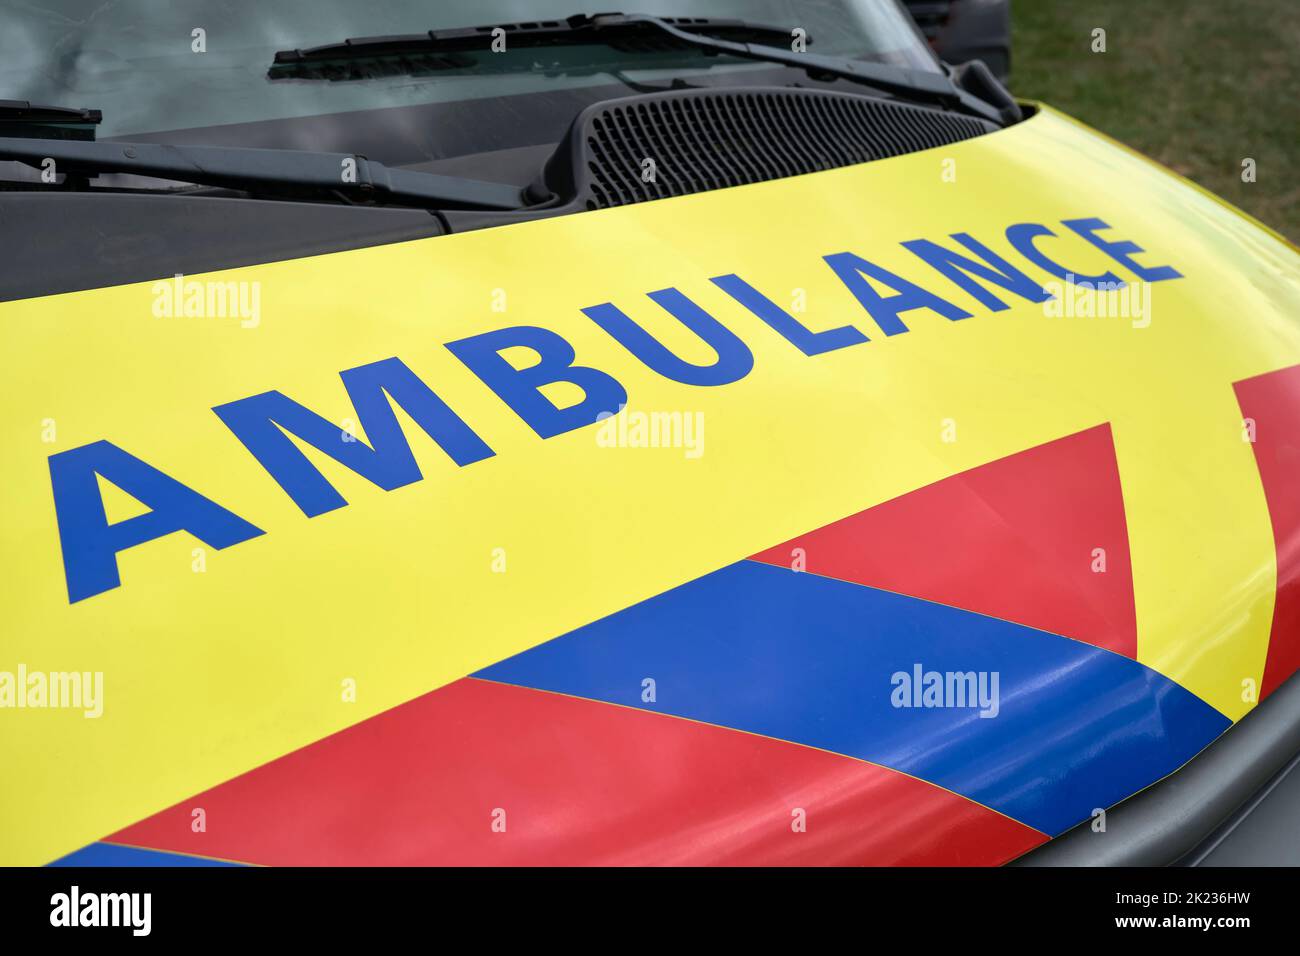 Dutch Ambulance logo on the hood of a parked medical van. Ambulance sign on yellow vehicle with red and blue stripes. Stock Photo